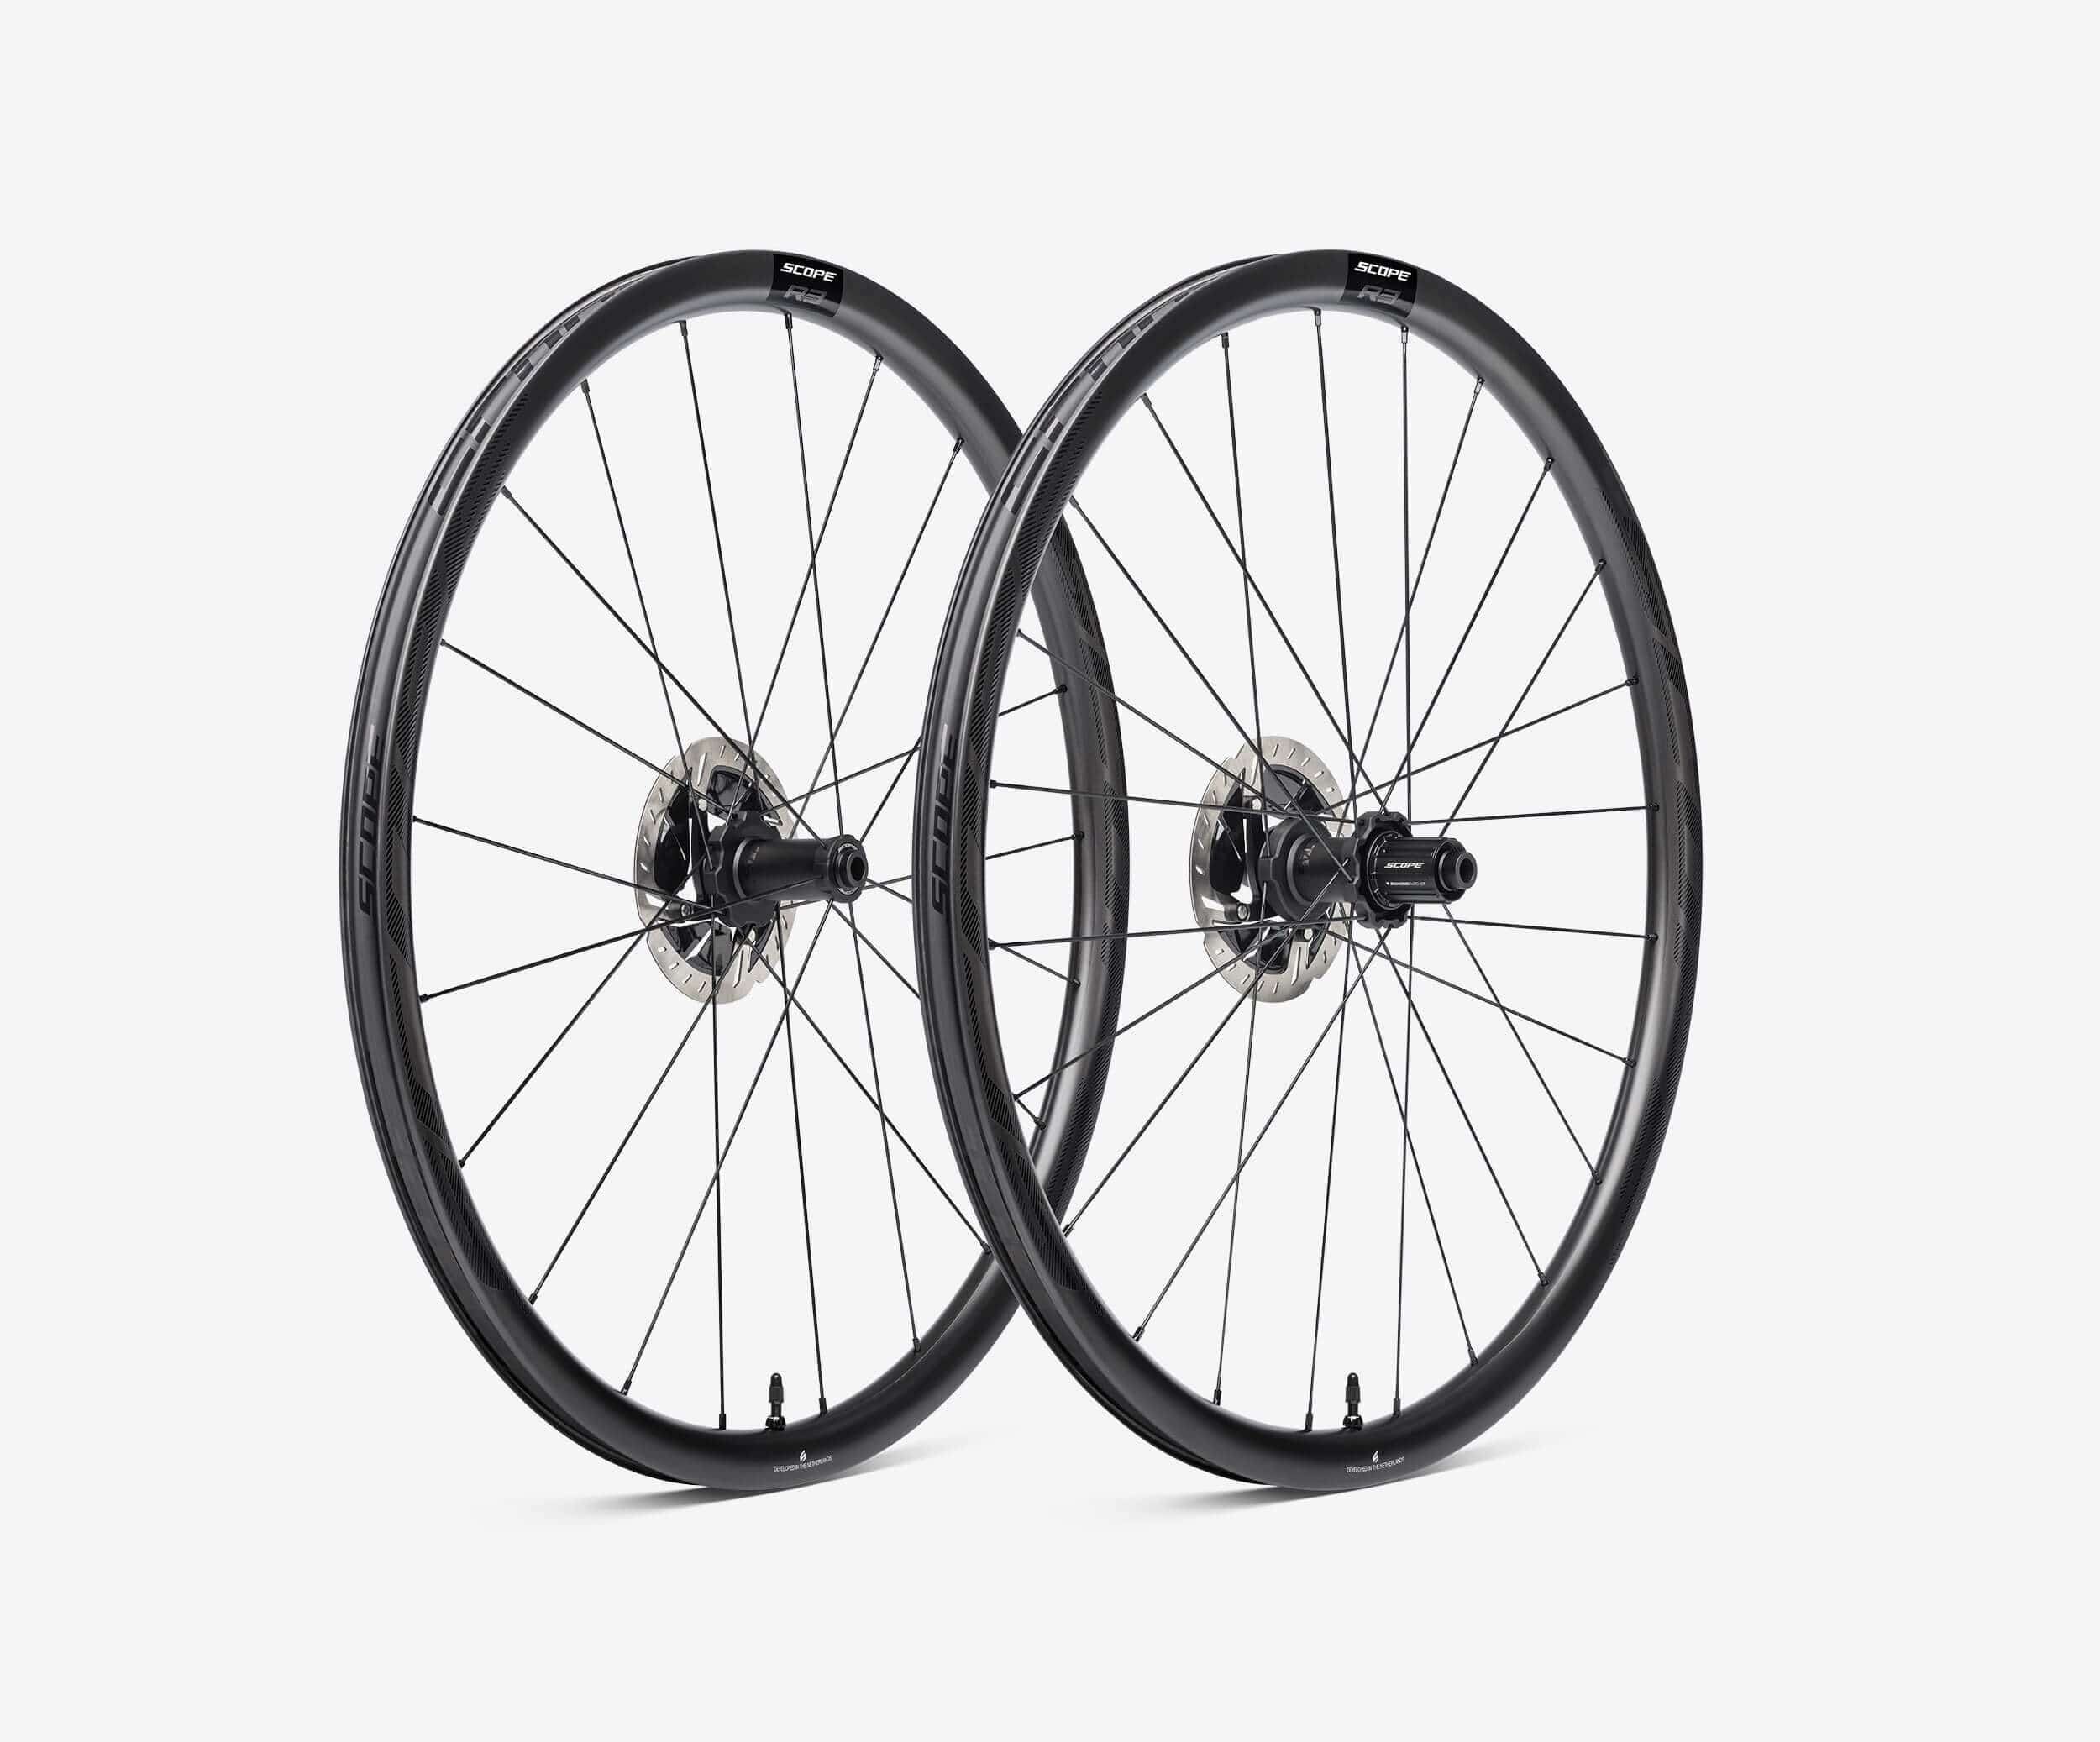 SCOPE R3 Disc　ホイール | SILBEST Cycle シルベストサイクル powered by BASE